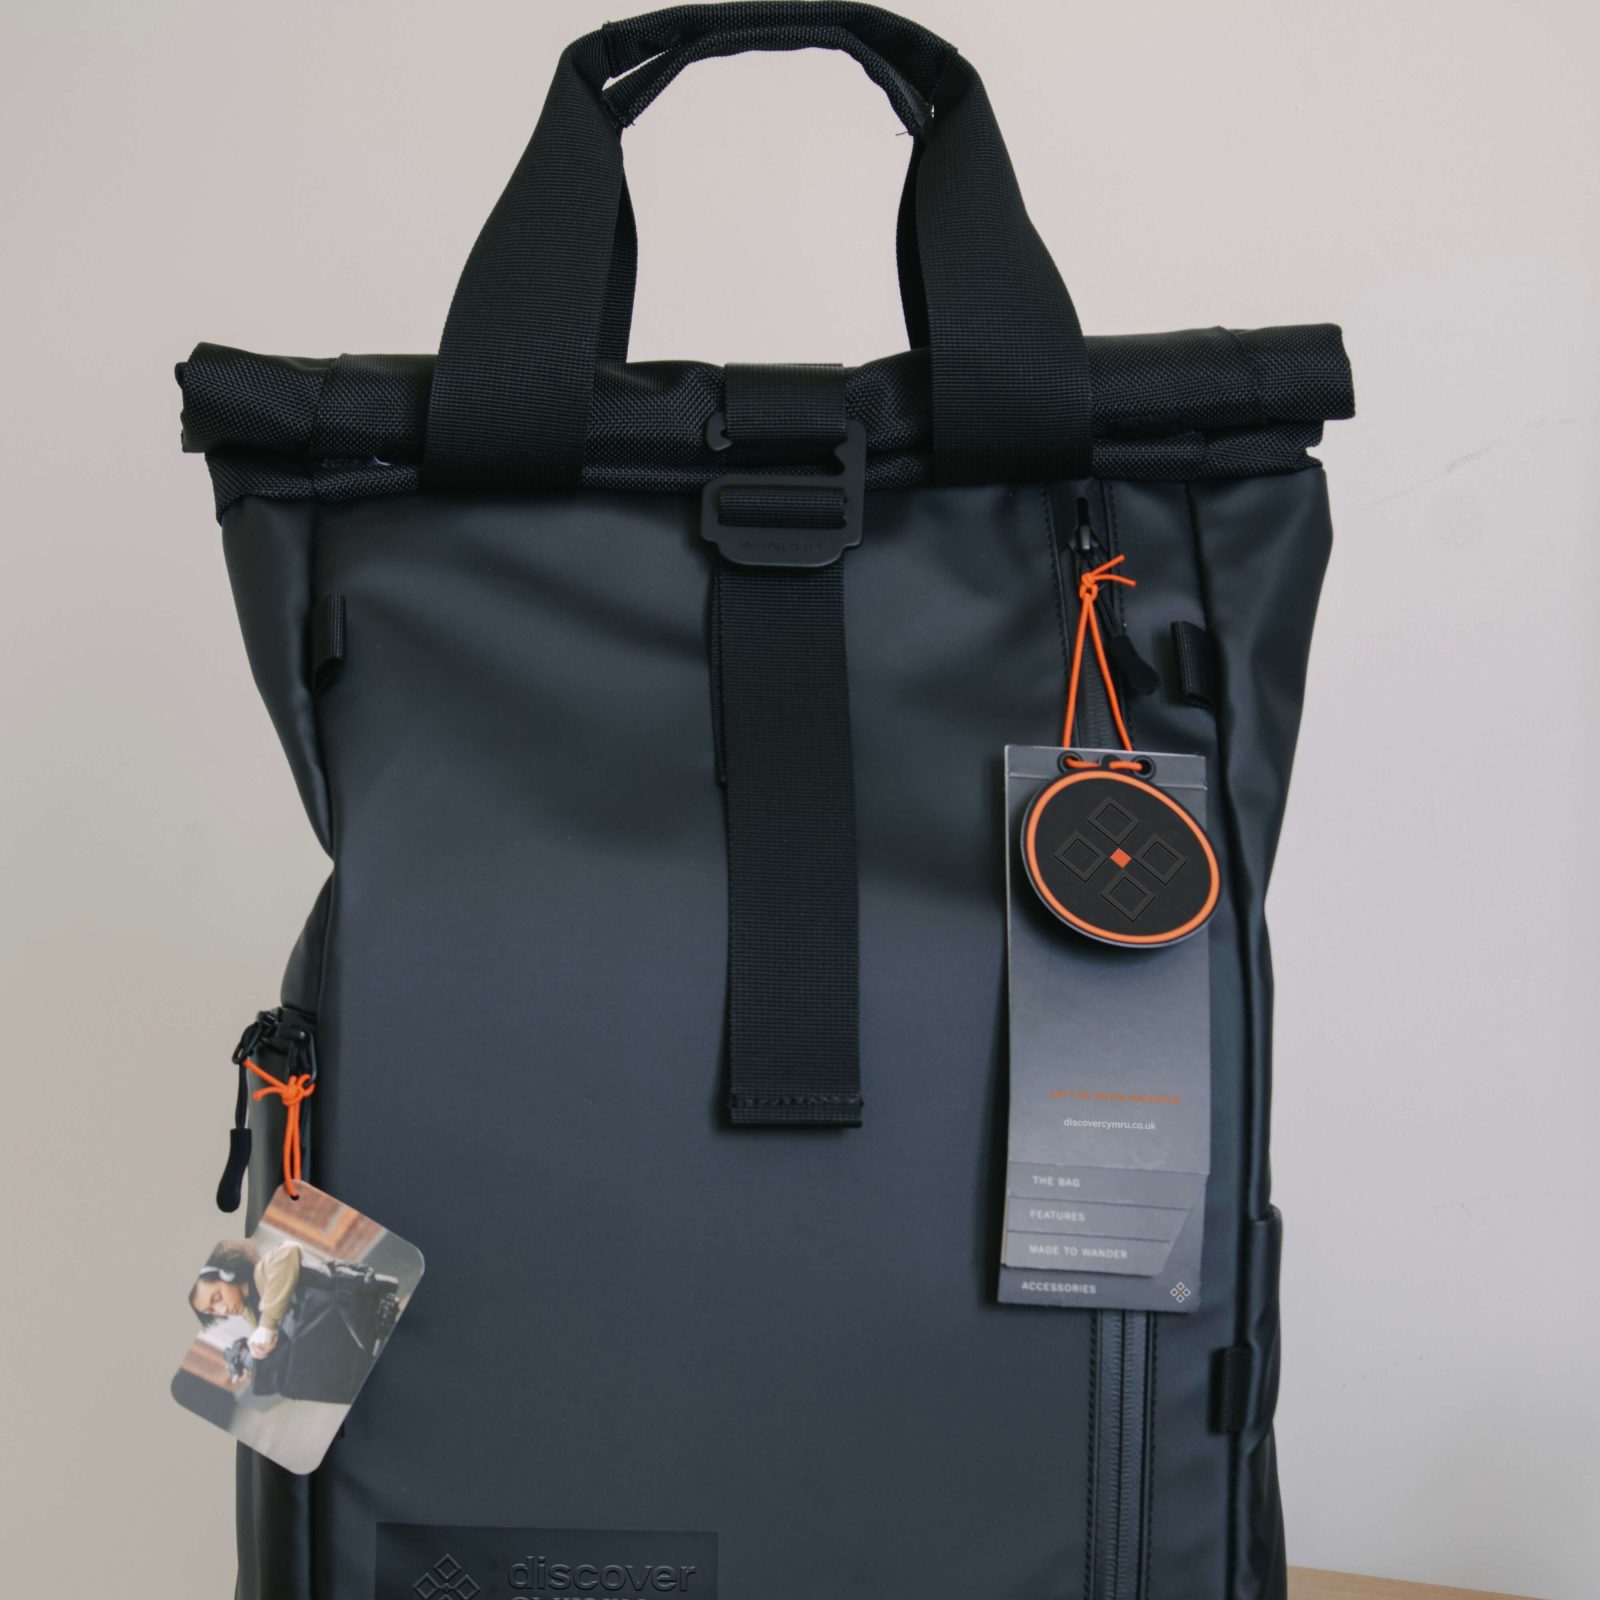 A gray roll-top backpack with black straps, featuring attached tags and a small compass, branded by a leading Brand Agency UK, standing upright against a light beige background.